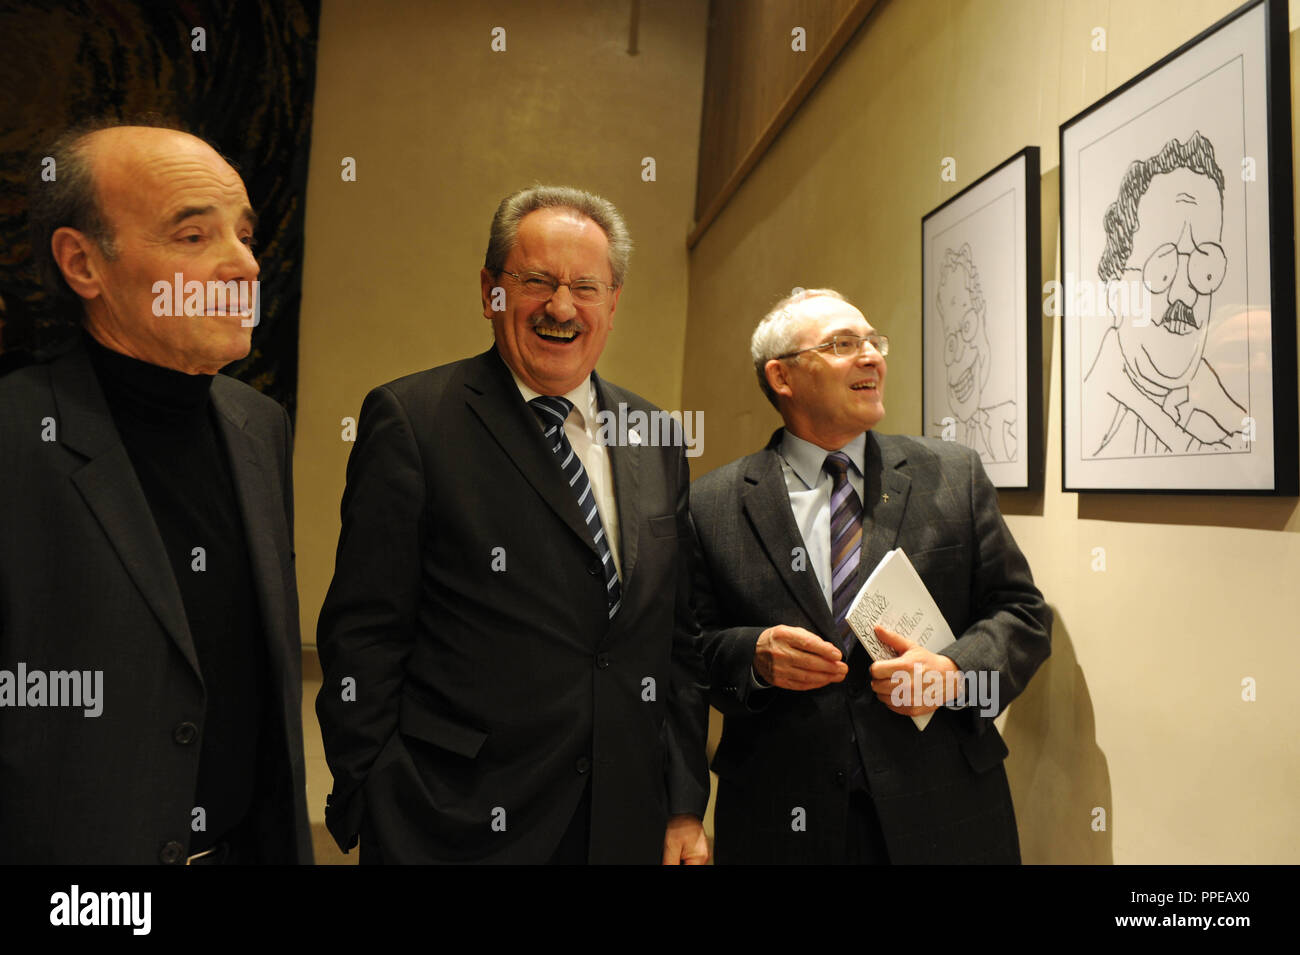 Left to right: Gabor Benedek, political cartoonist for Sueddeutsche Zeitung, Christian Ude, the mayor of Munich and Academy Director Dr. Florian Schuller at the opening of an exhibition of Benedek's cartoons in the Catholic Academy of Bavaria. Stock Photo